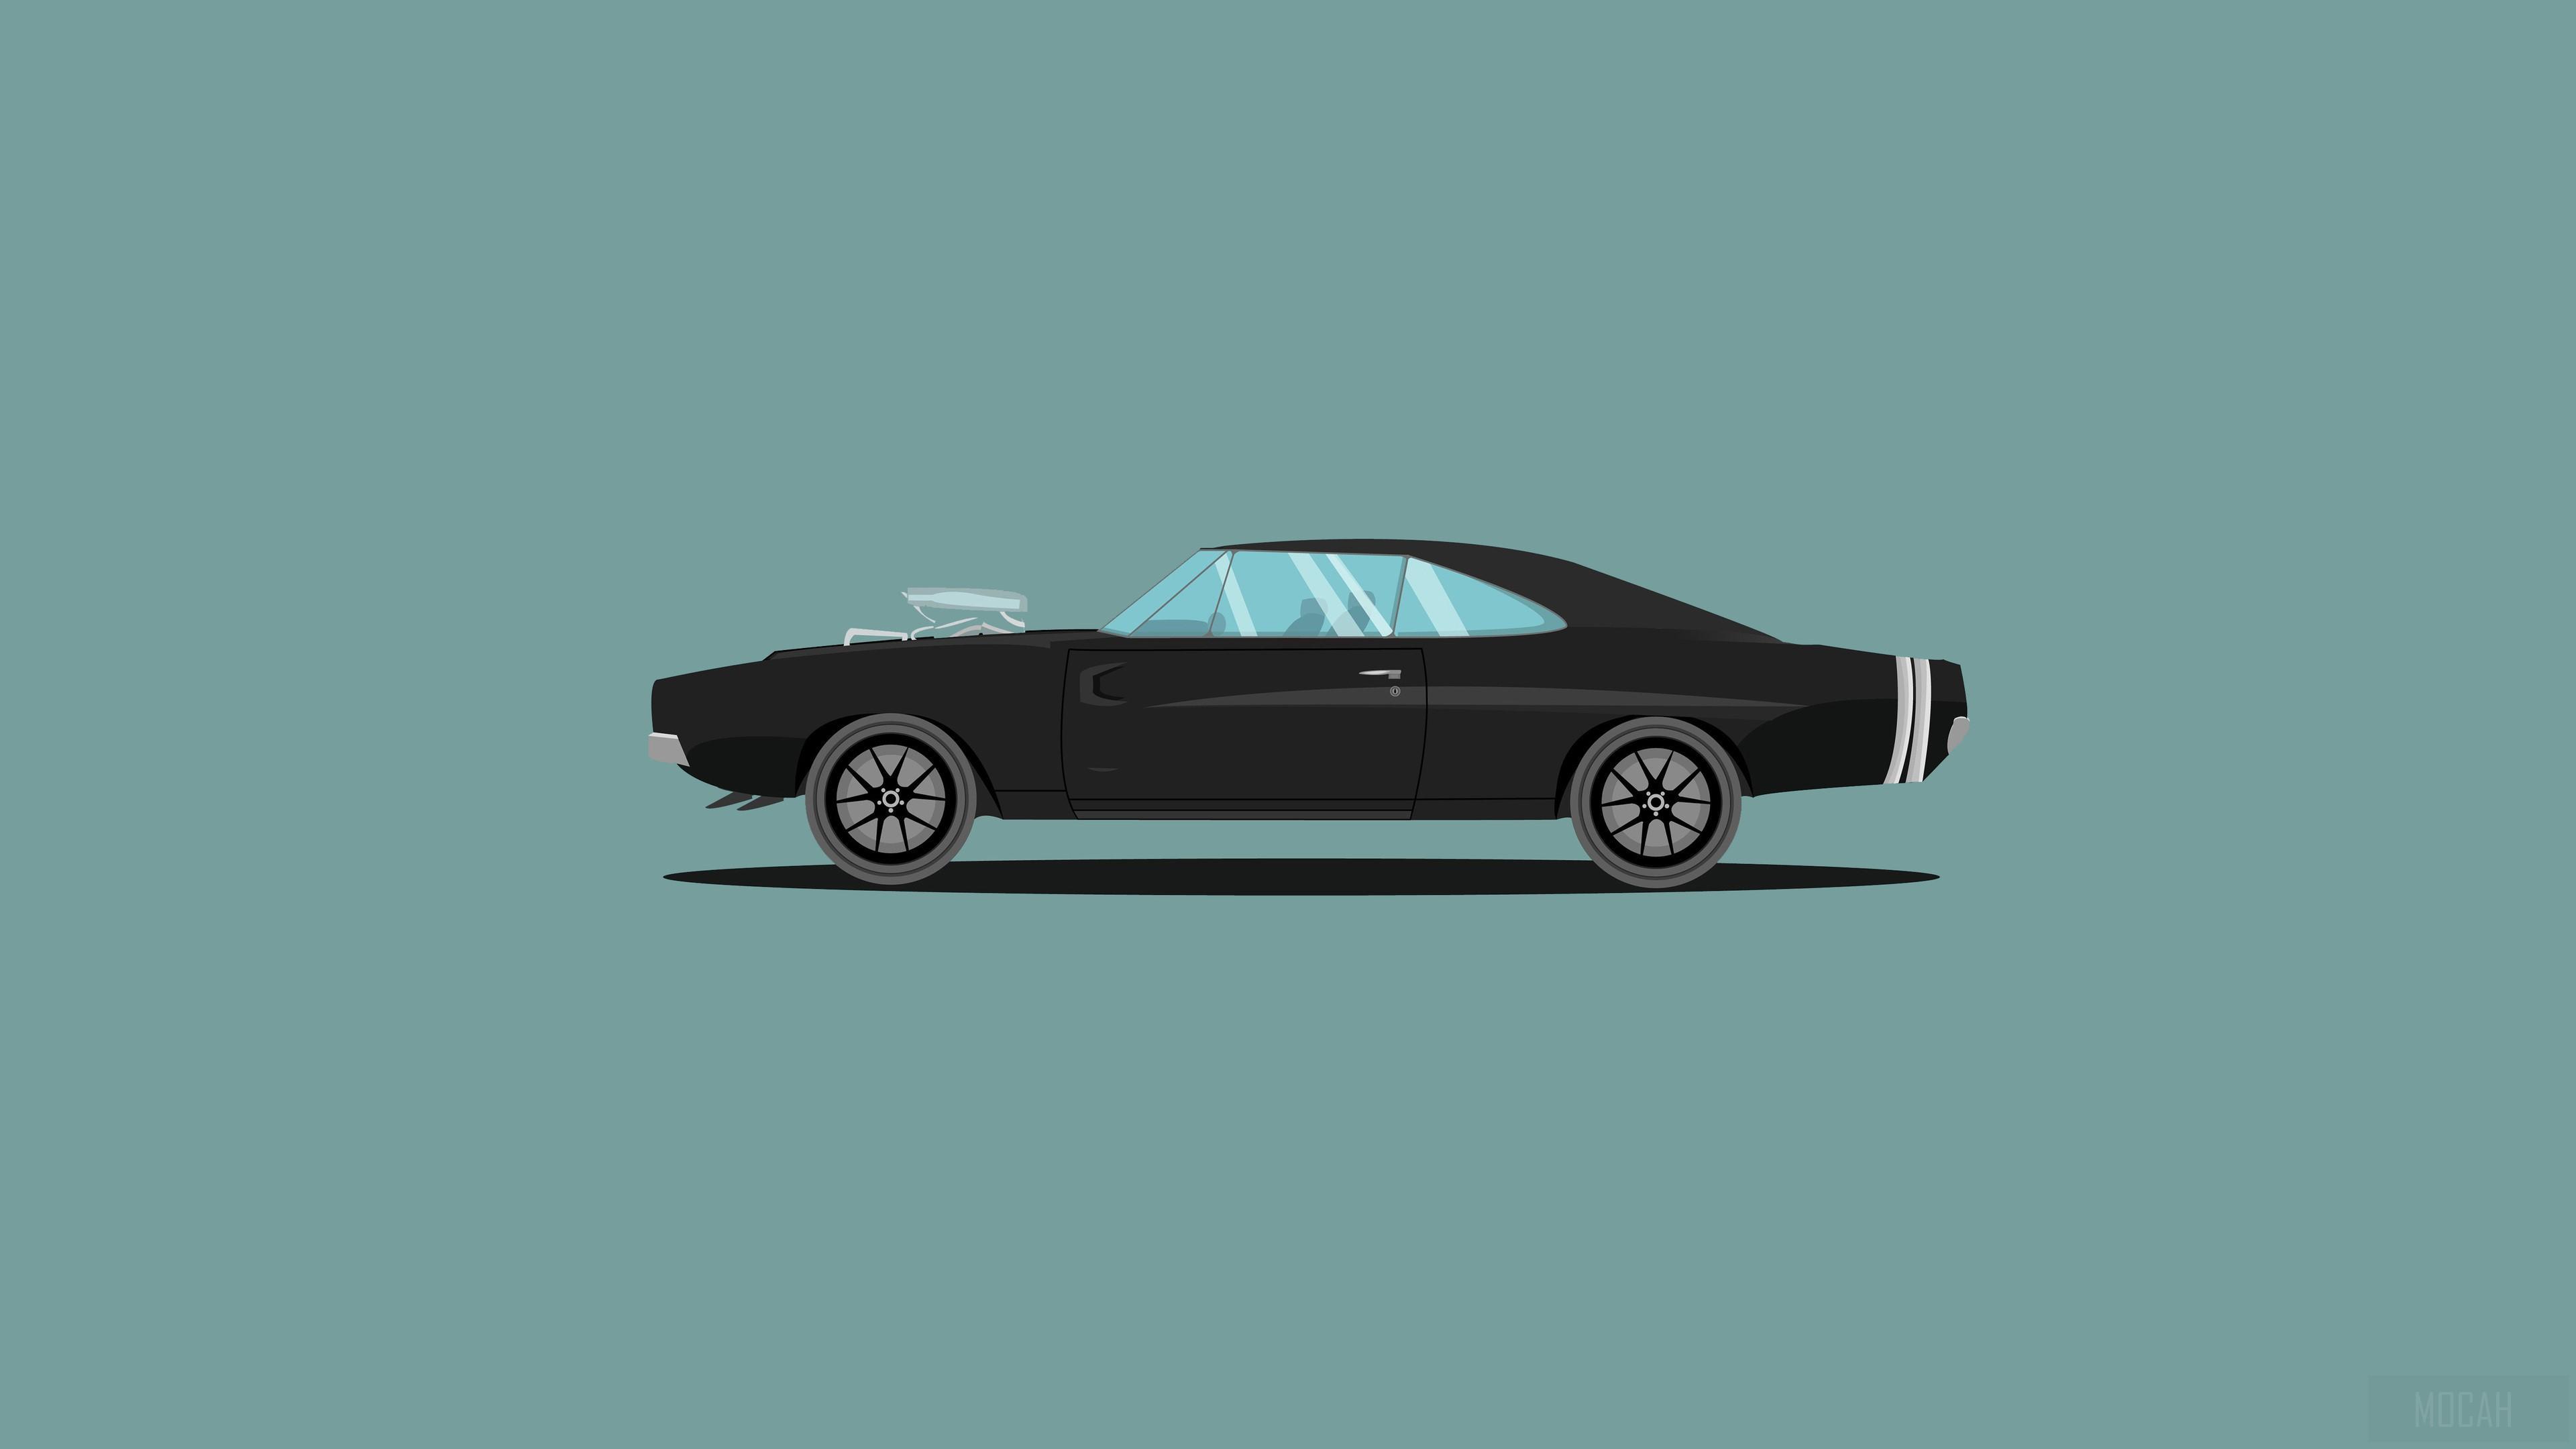 HD wallpaper, 1970 Dodge Charger Fast And Furious Edition Illustration 4K